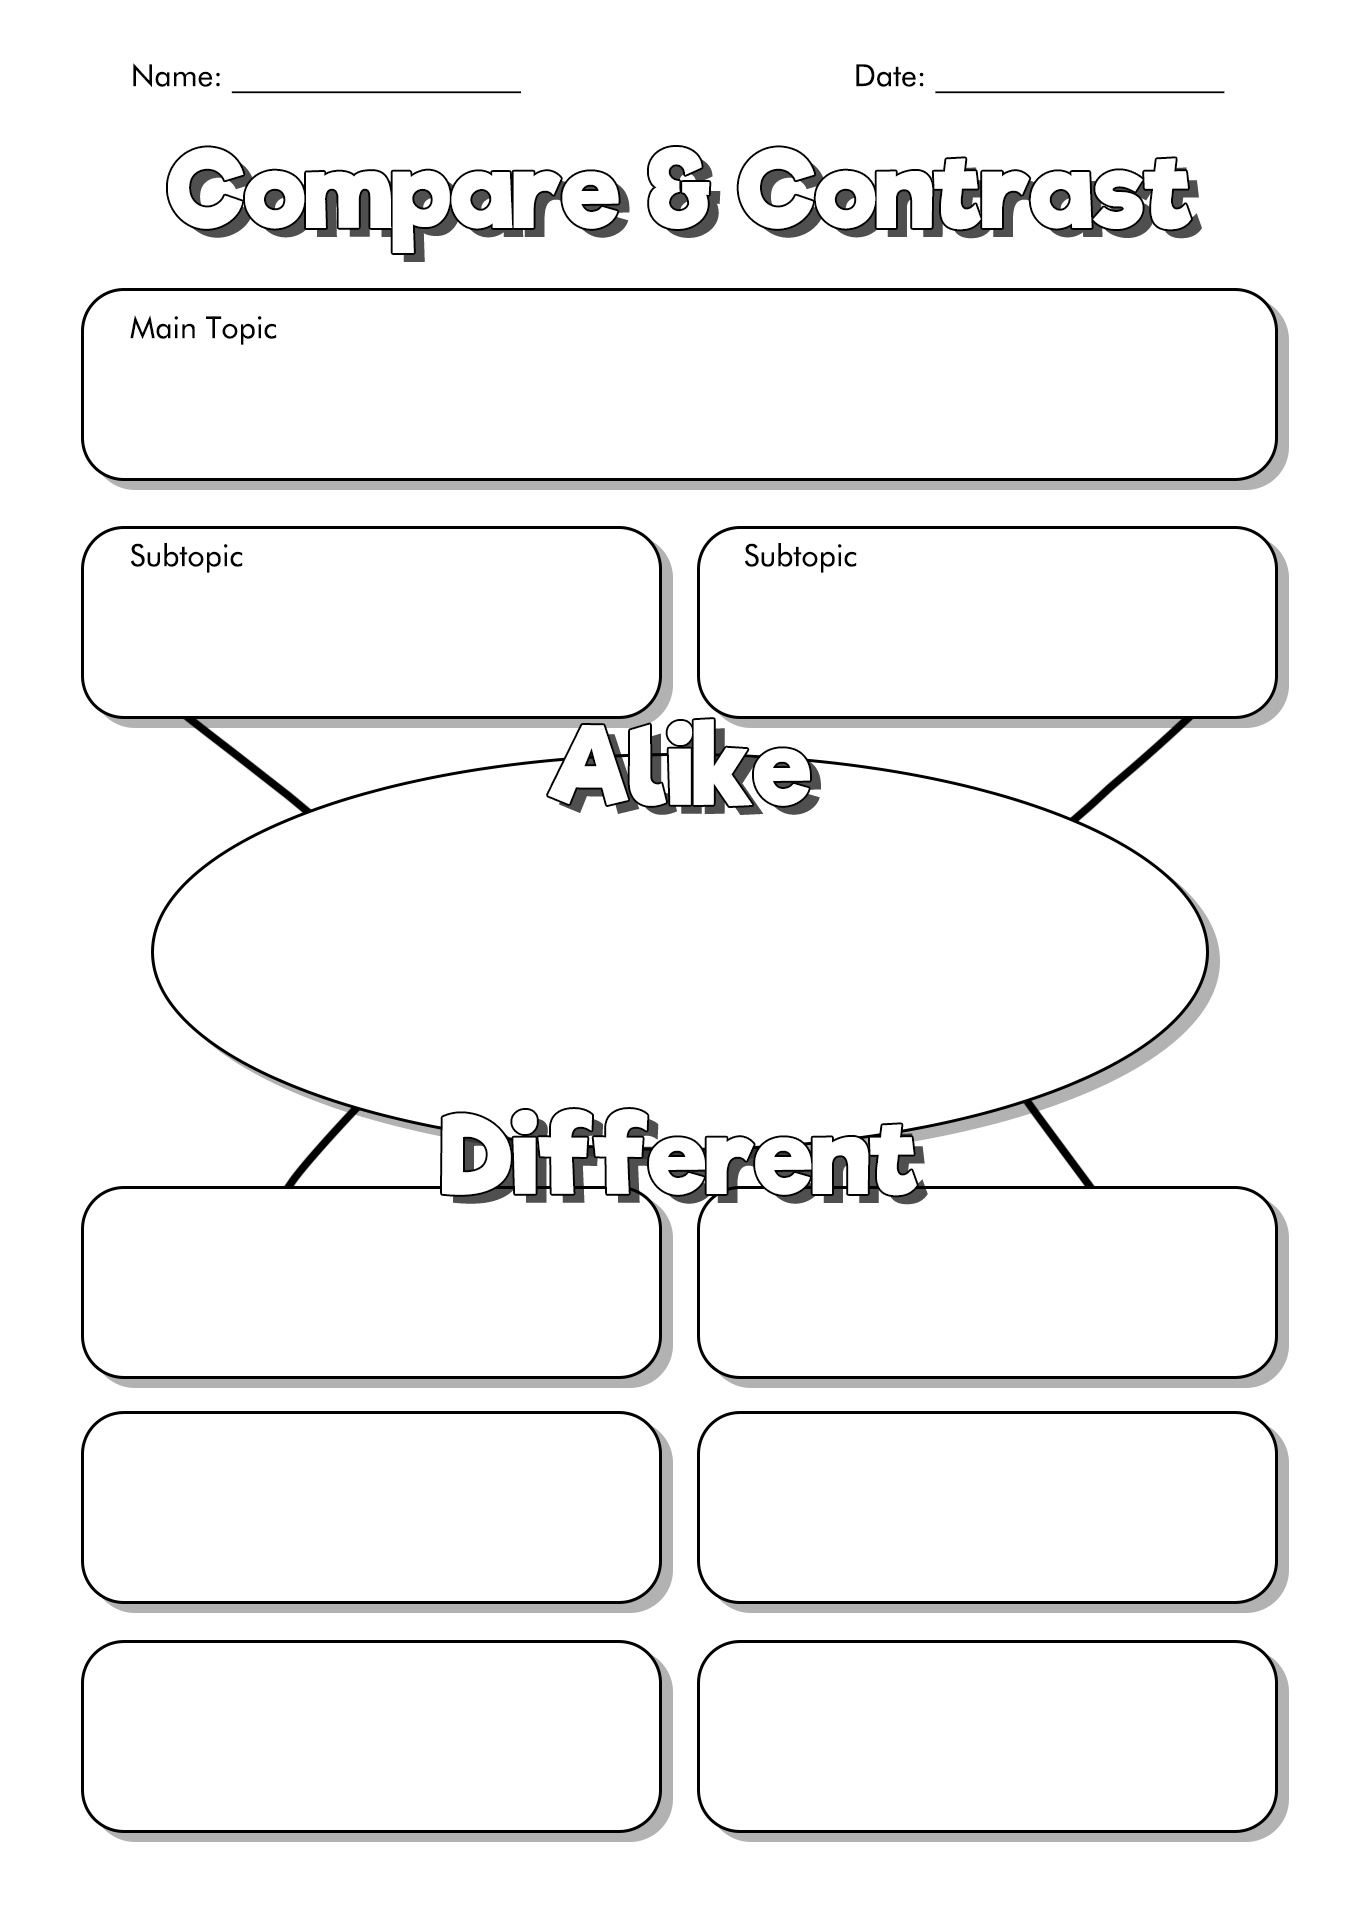 15 Best Images of Blank Compare And Contrast Worksheets Compare and